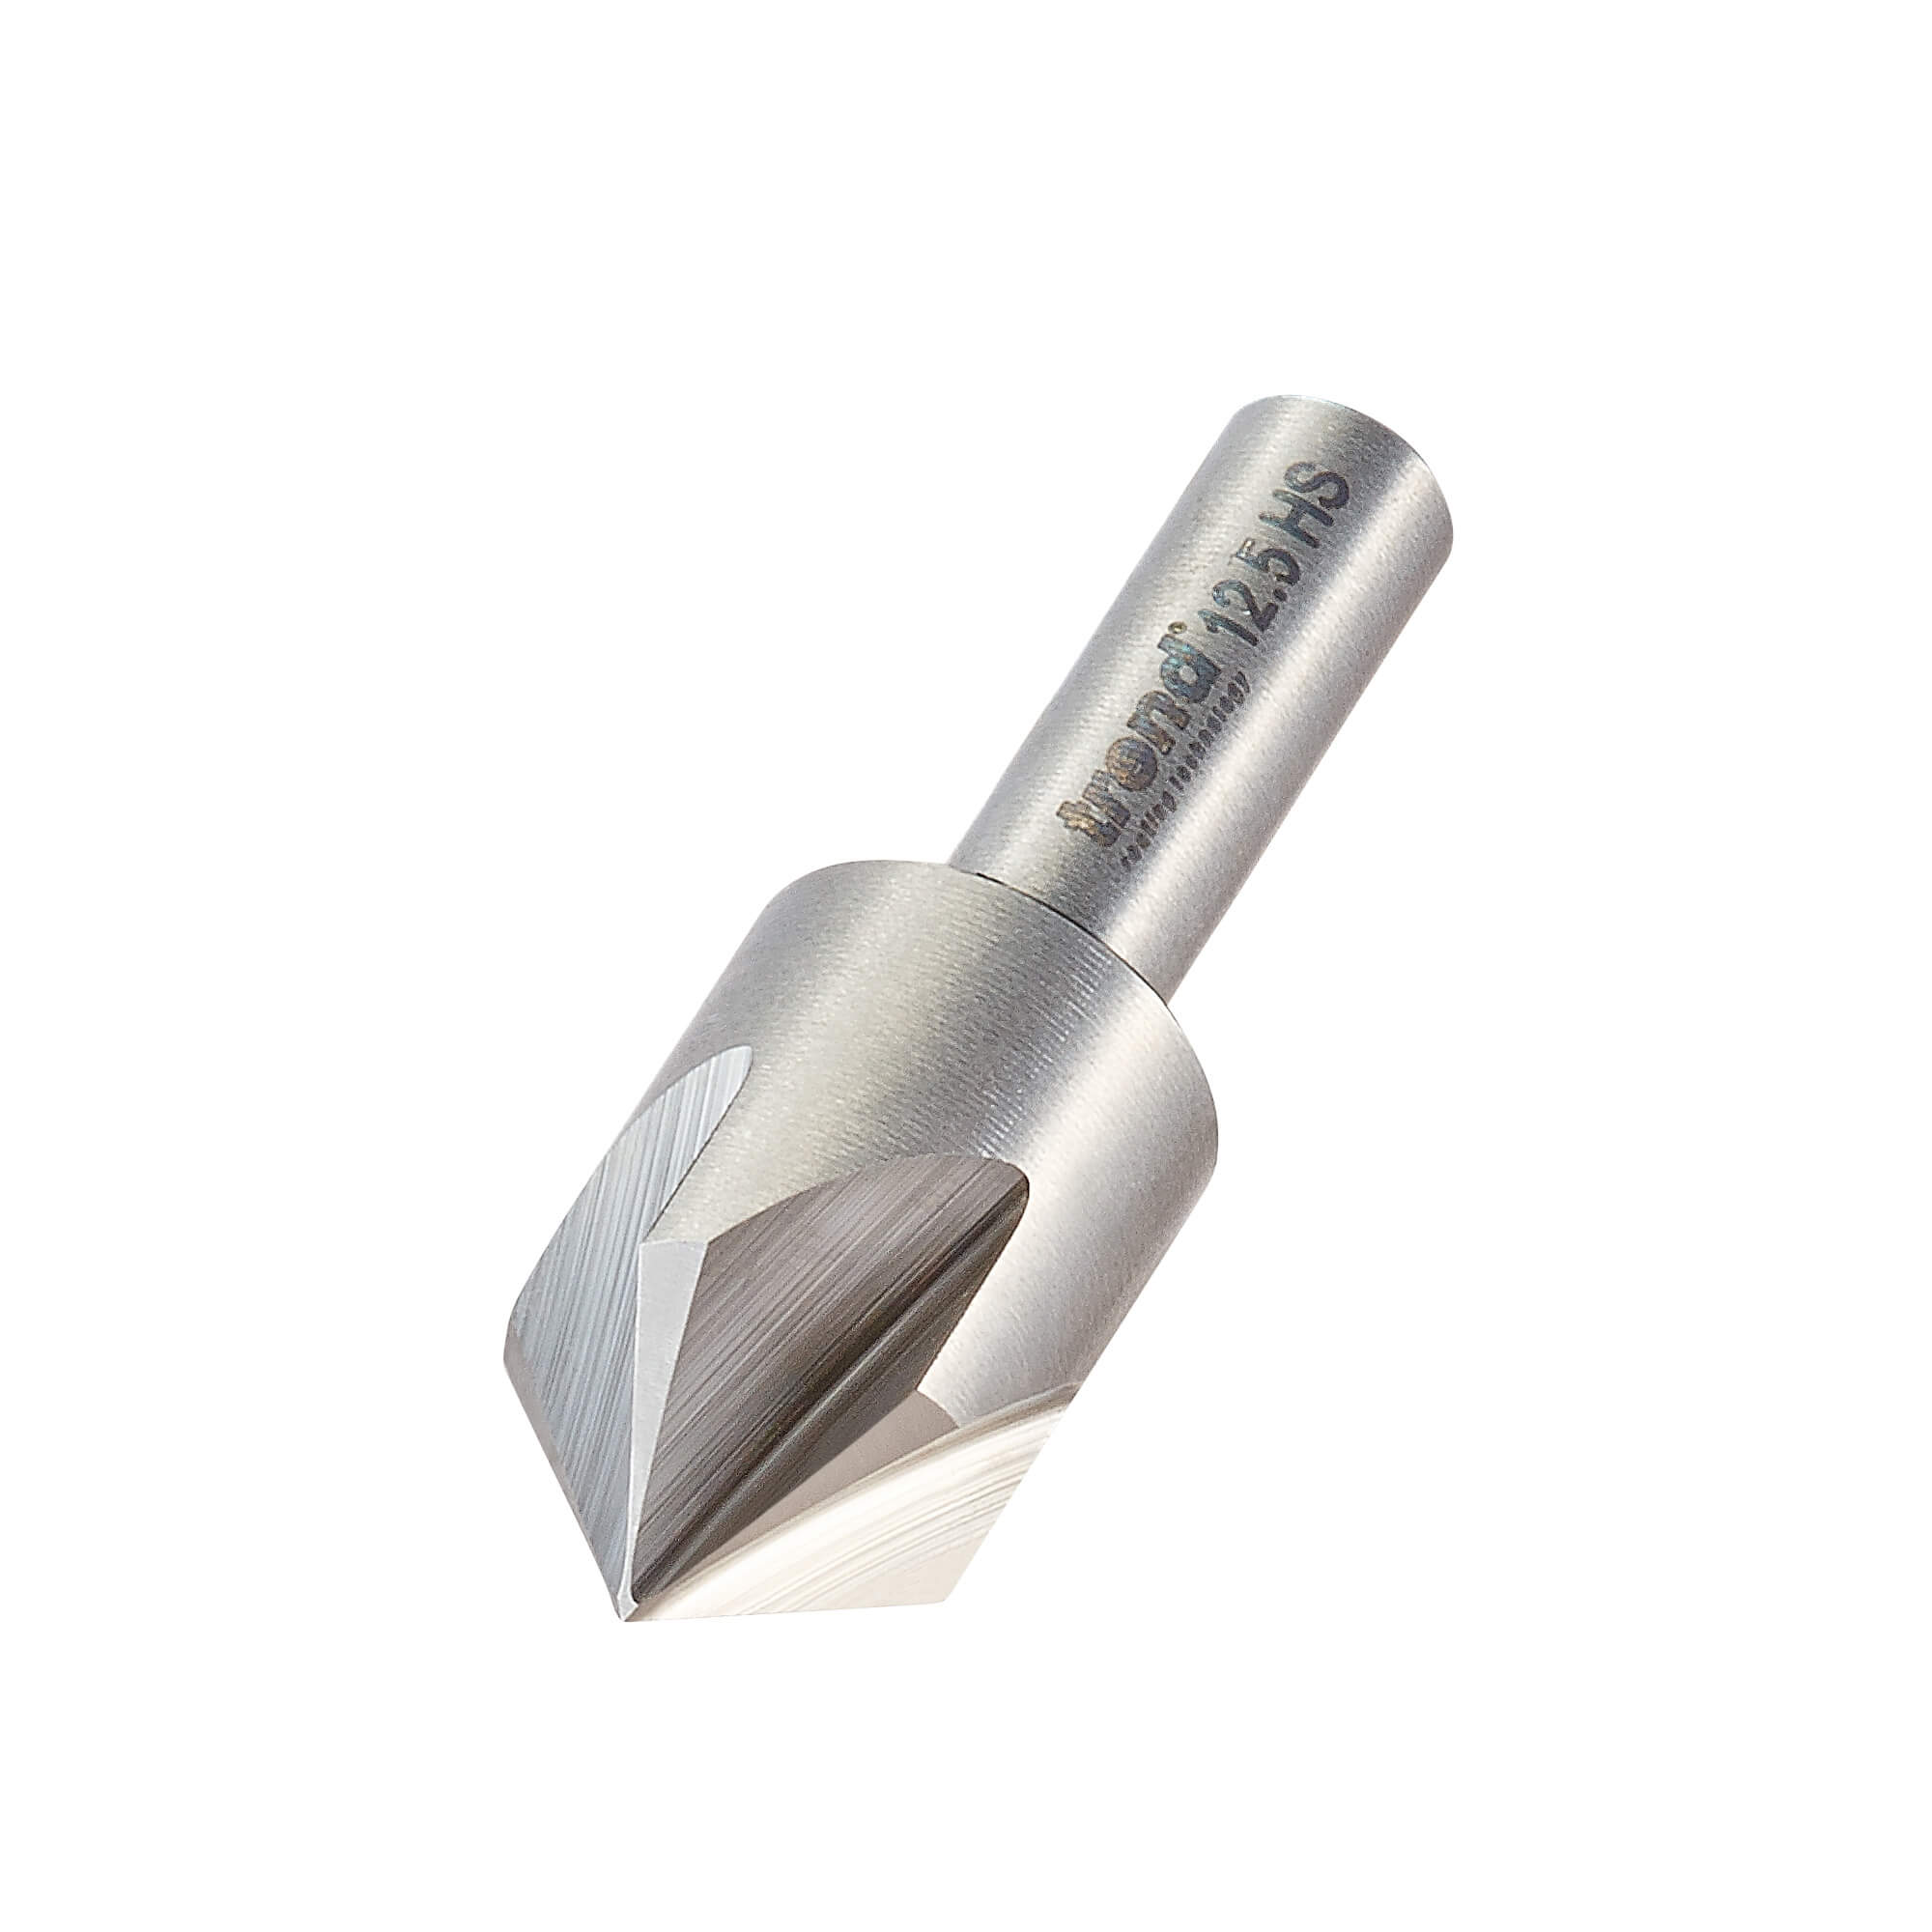 Image of Trend HSS Rose Countersink 12.5mm